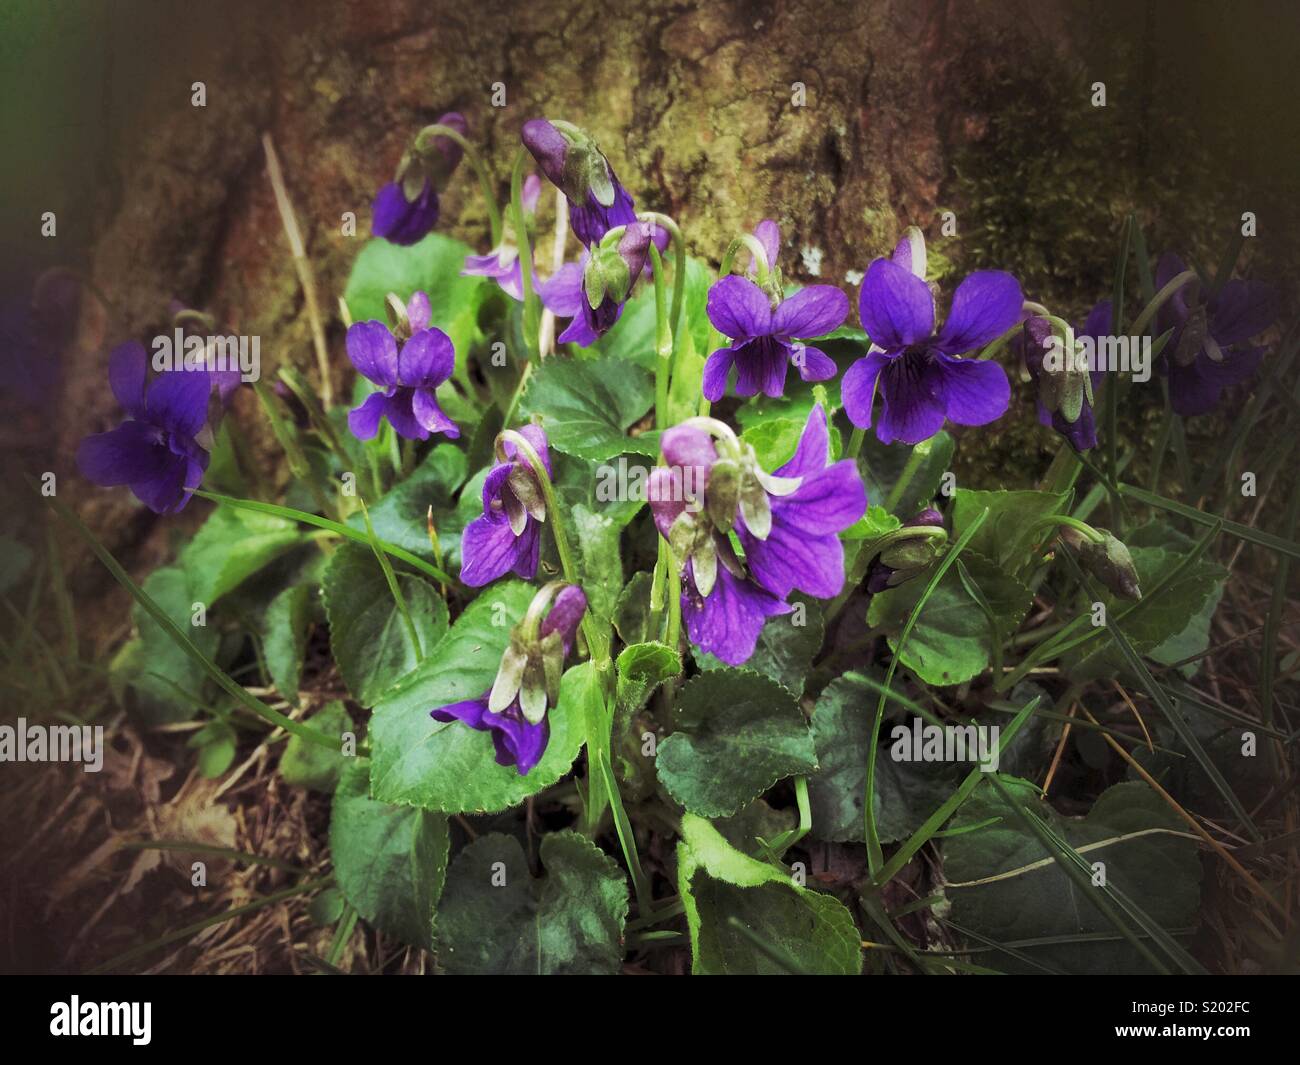 Sweet violets growing wild beside a tree. Stock Photo